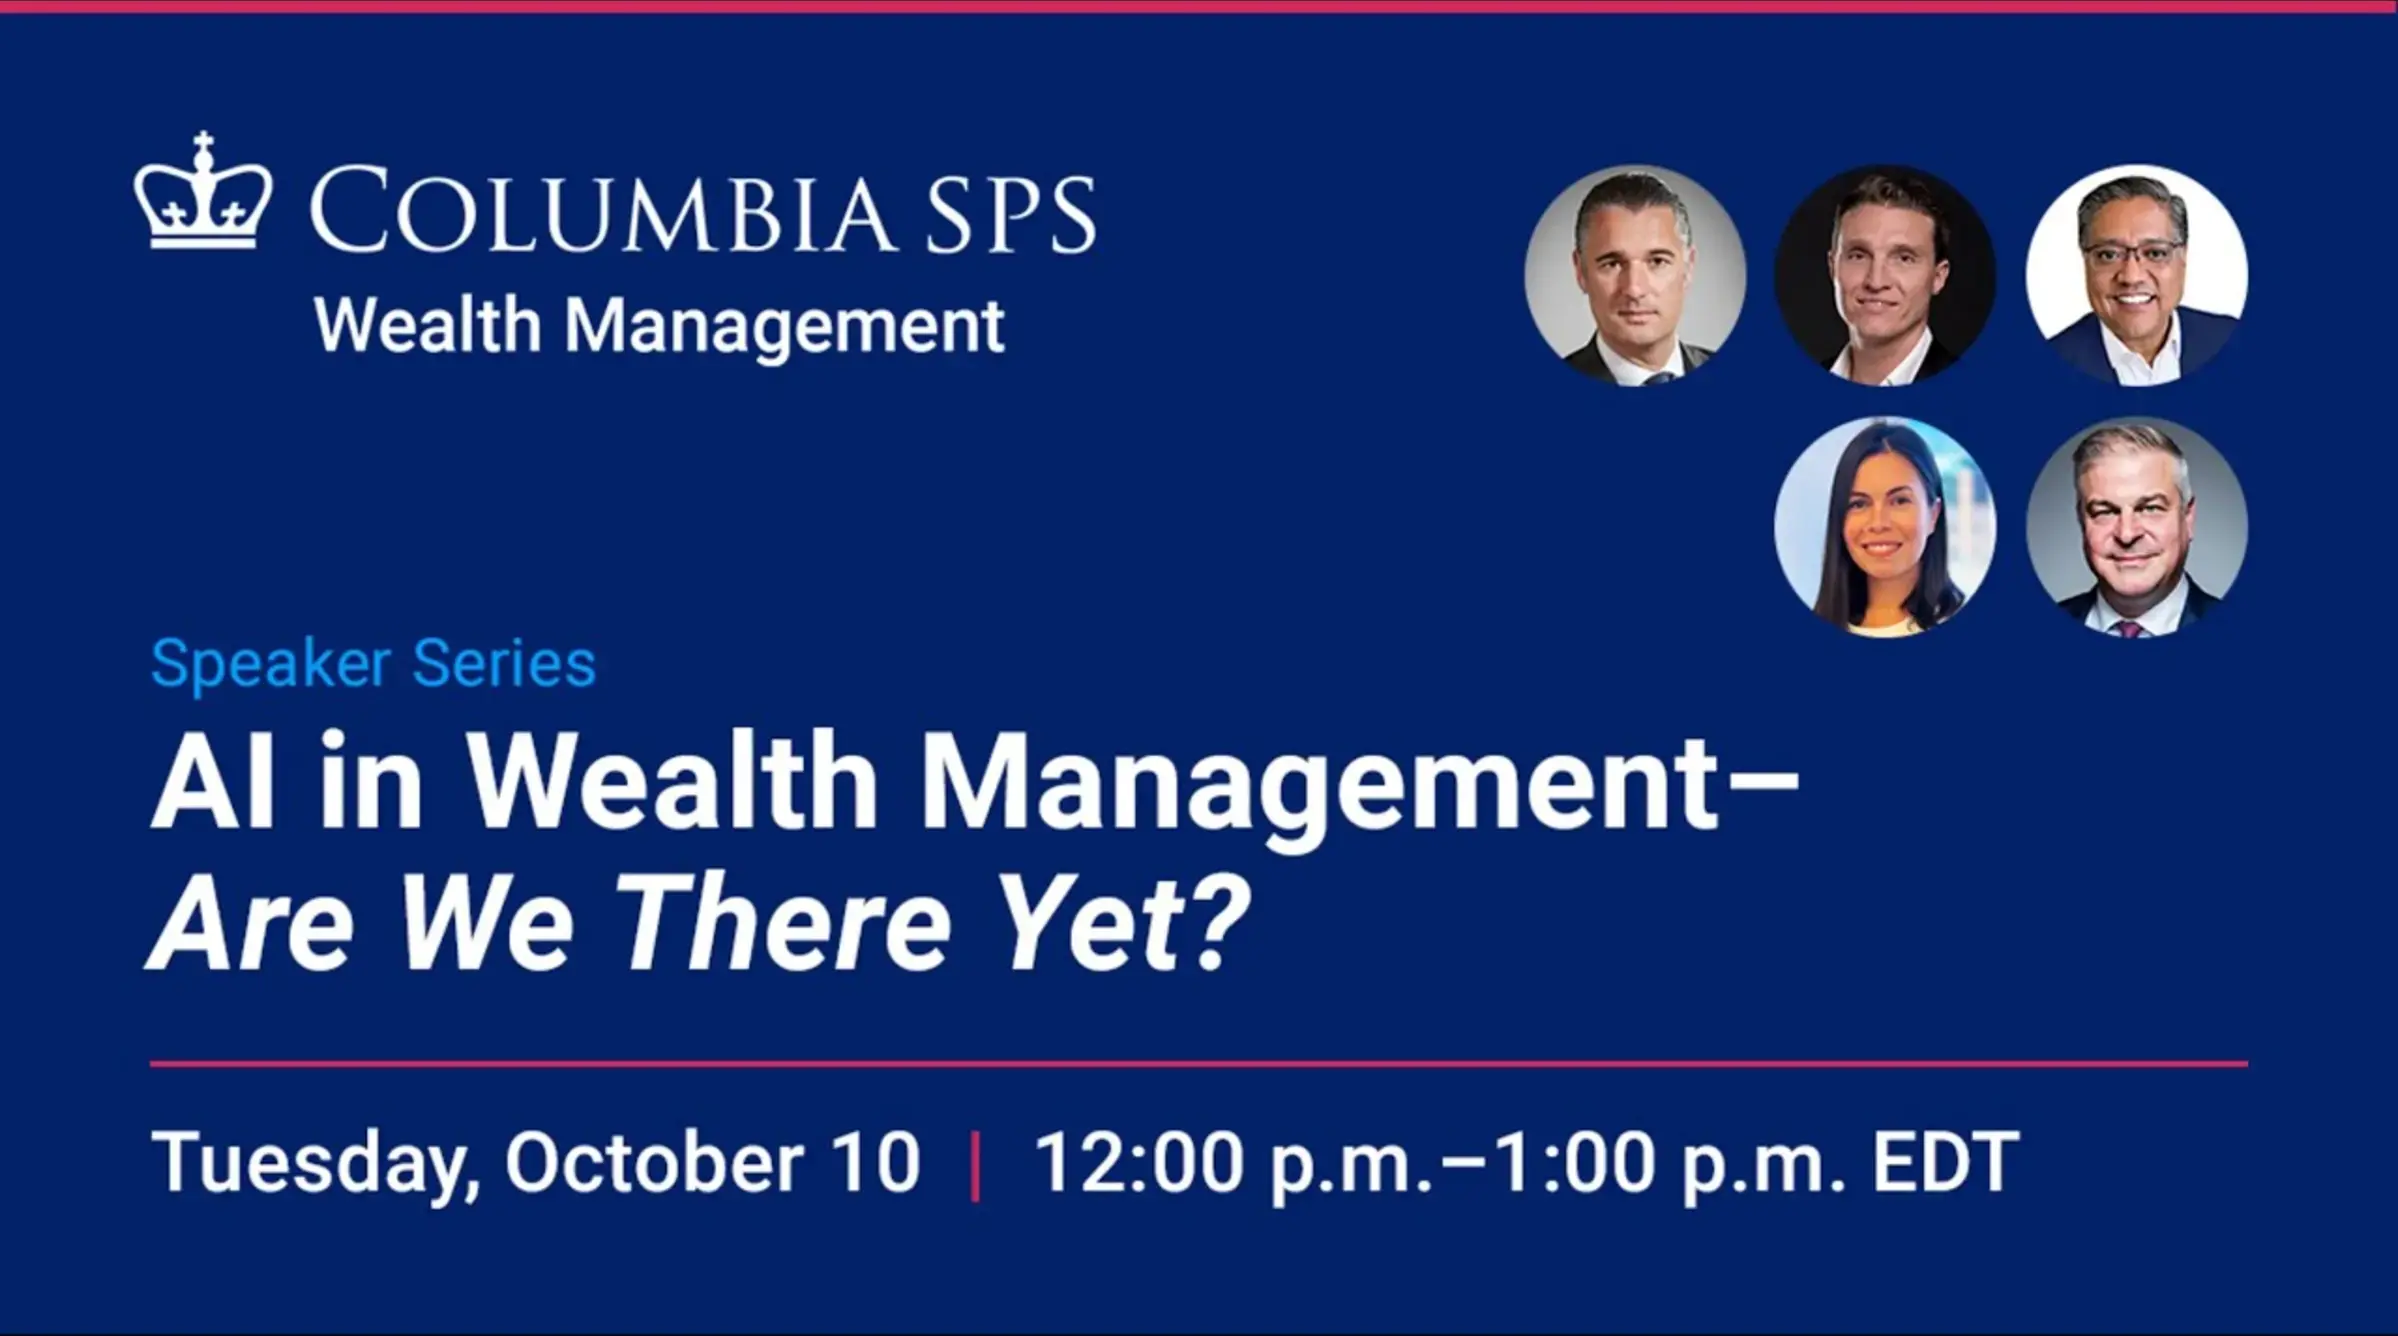 AI in Wealth Management - Are We There Yet?